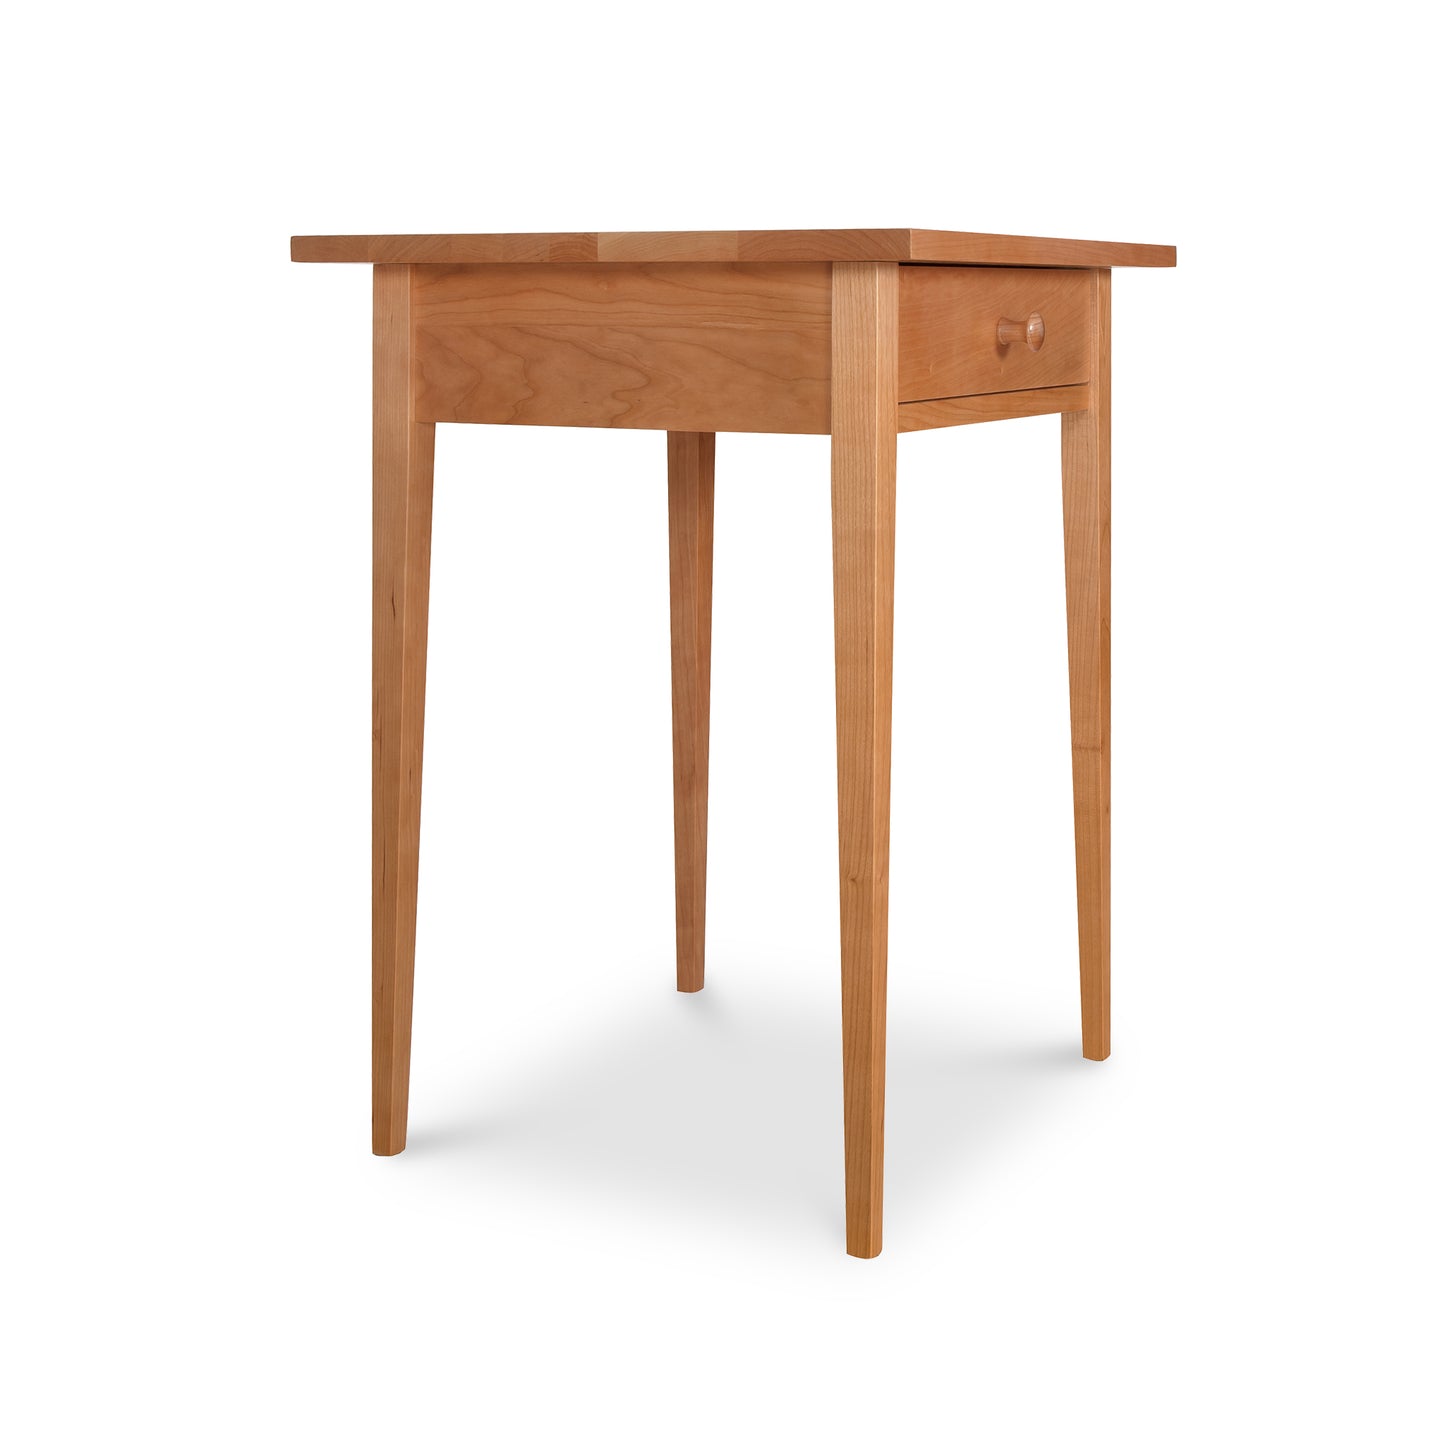 A Lyndon Furniture Shaker 1-Drawer Nightstand, crafted from eco-friendly wood, featuring a convenient drawer.